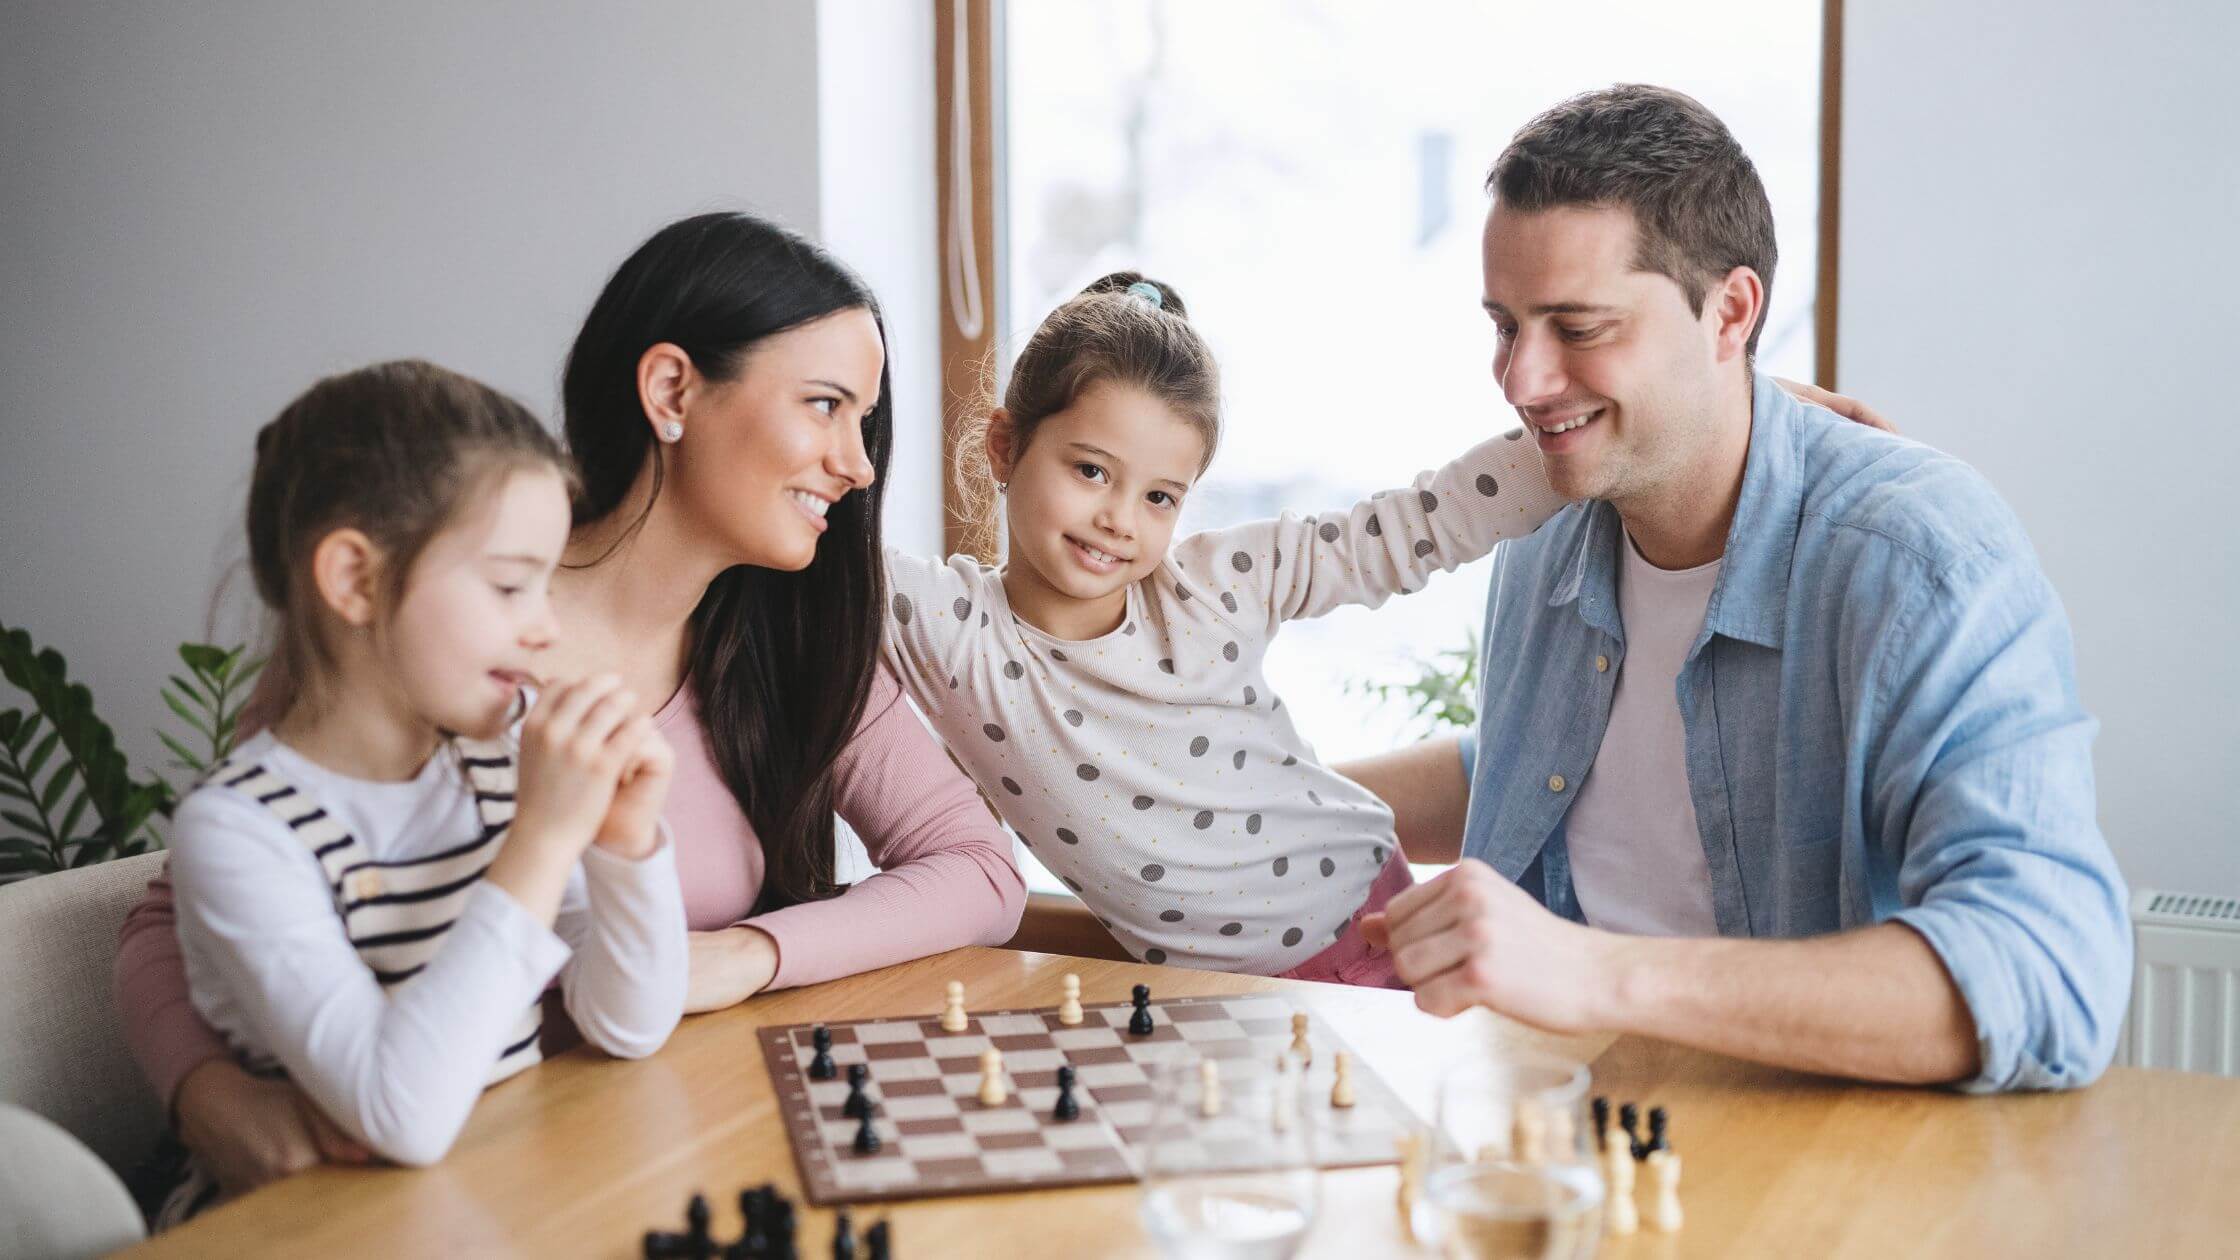 Playing chess with family